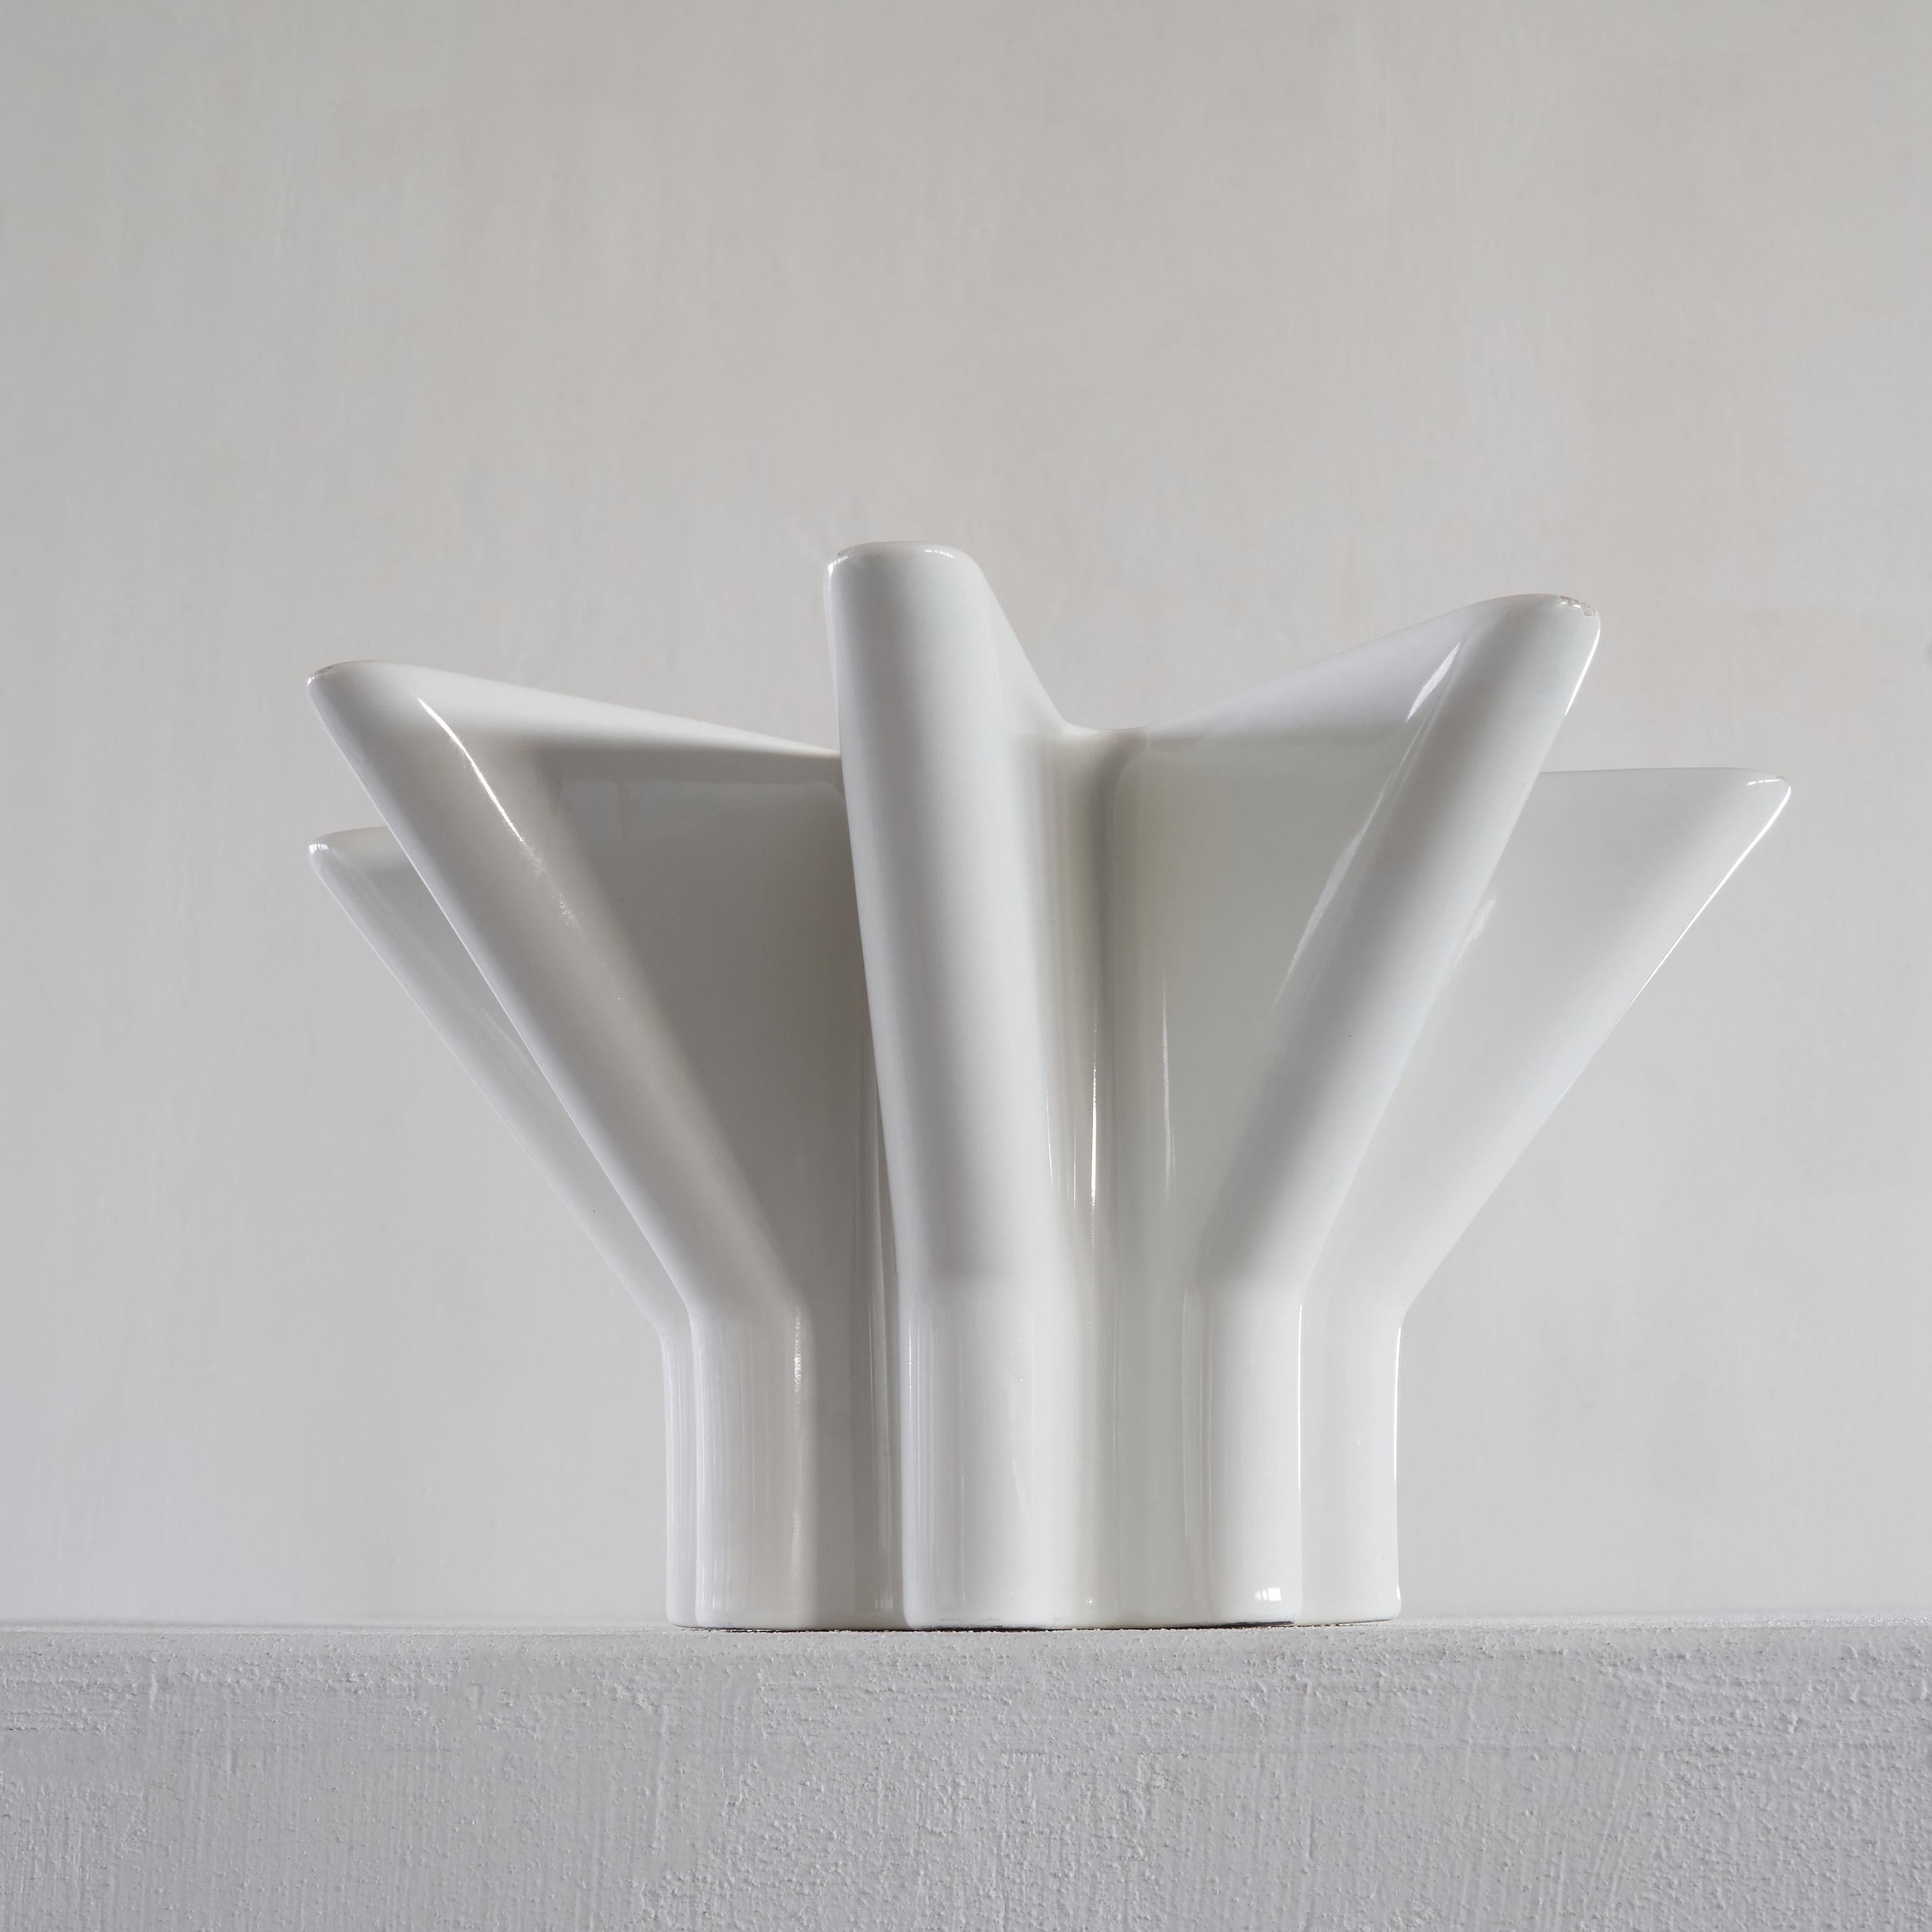 Rare and large post modern vase by Marilena Boccato, Gian Nicola Gigante en Antonio Zambusi for Sicart Cartigliano. Italy, 1970's.

The remarkable and impressive shape impresses. The size of this ceramic object also ensures that it immediately